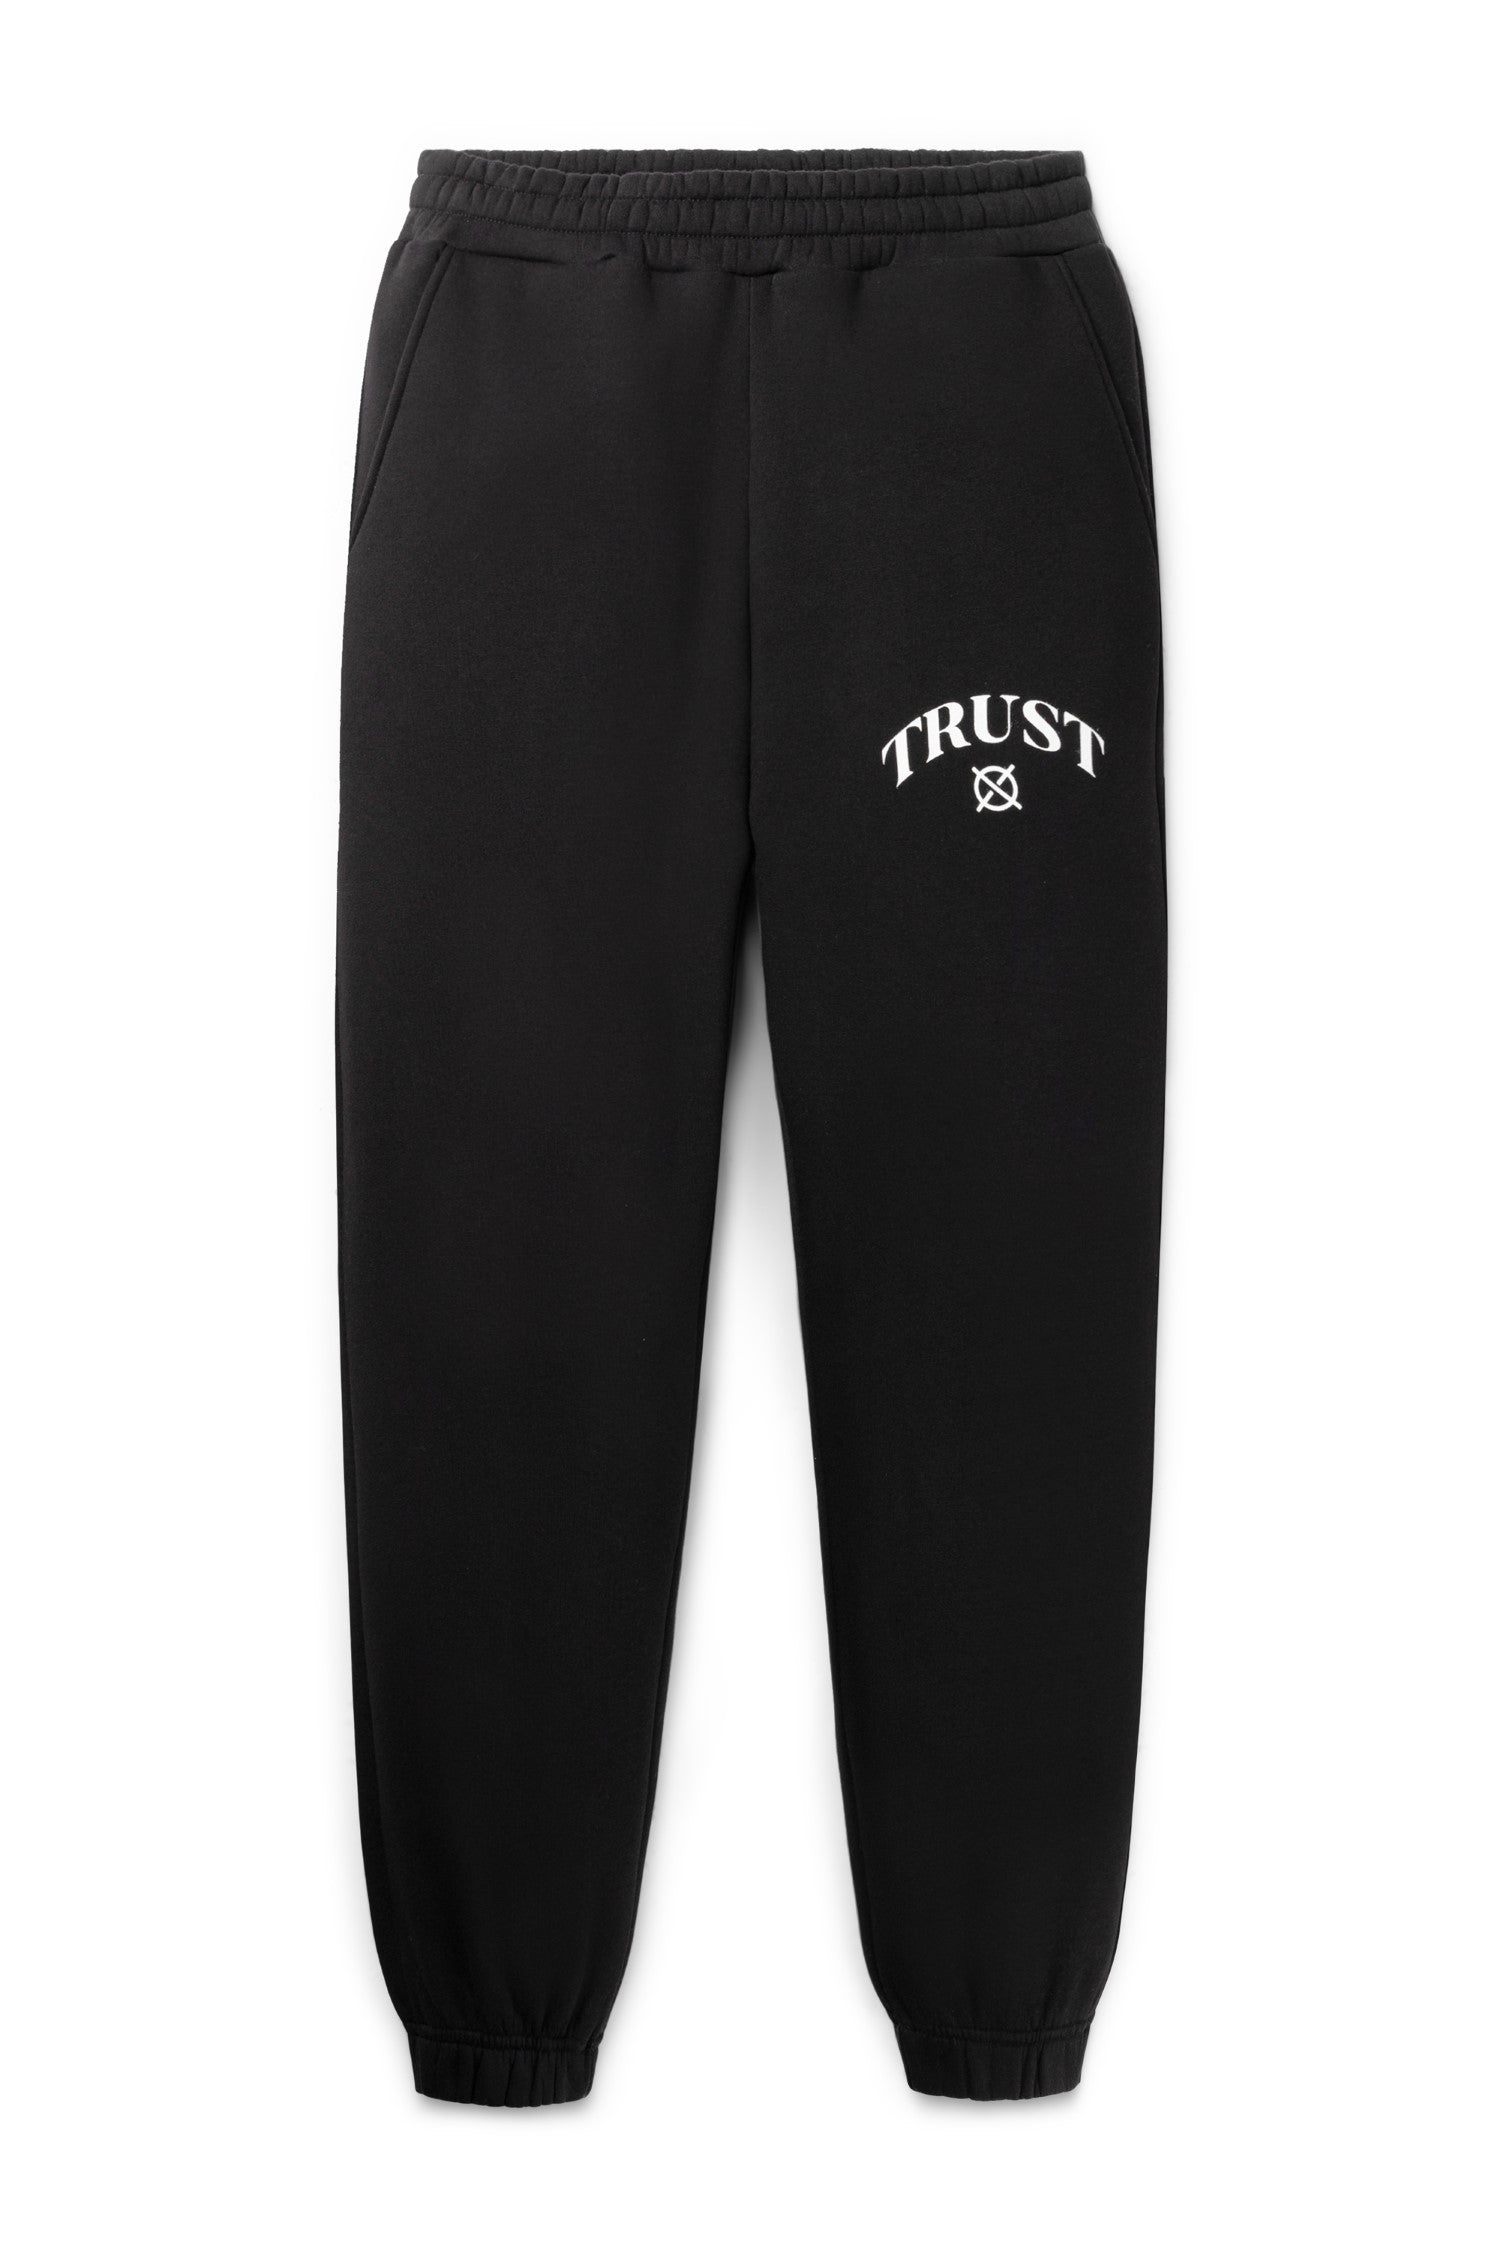 Not An Issue Sweatpants Black